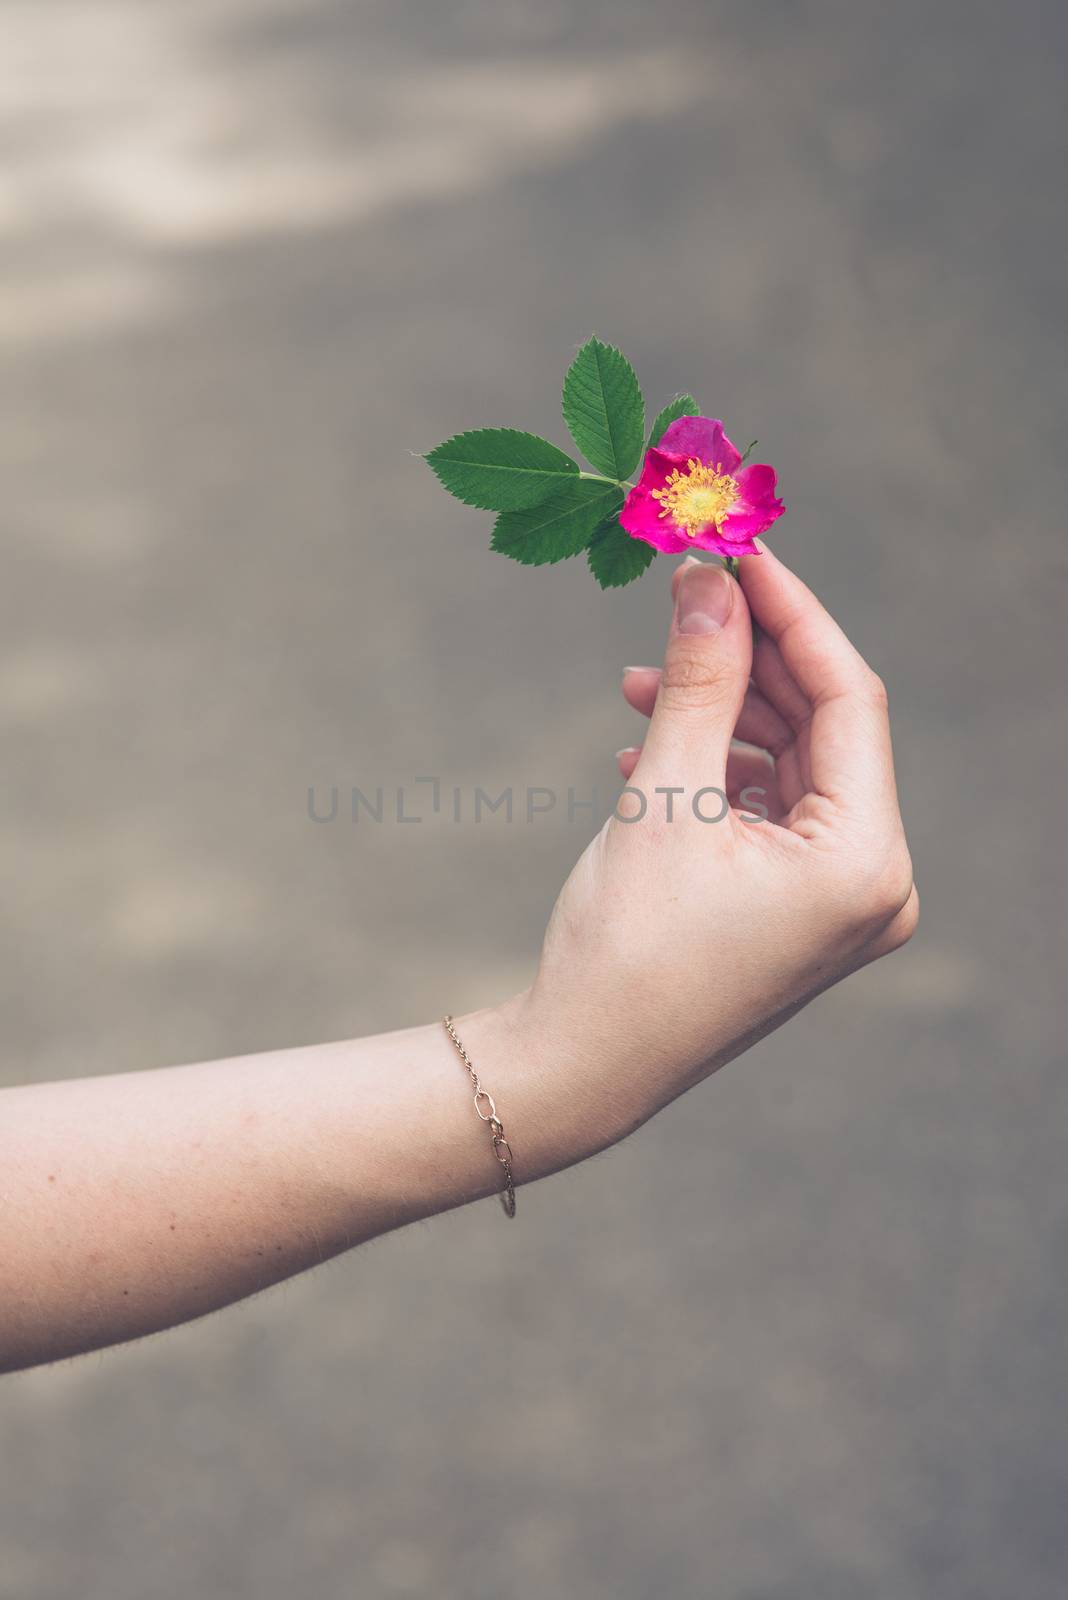 the hand of the girl with the golden chain keeps the redflower briar against blurred background with copyspace by skrotov